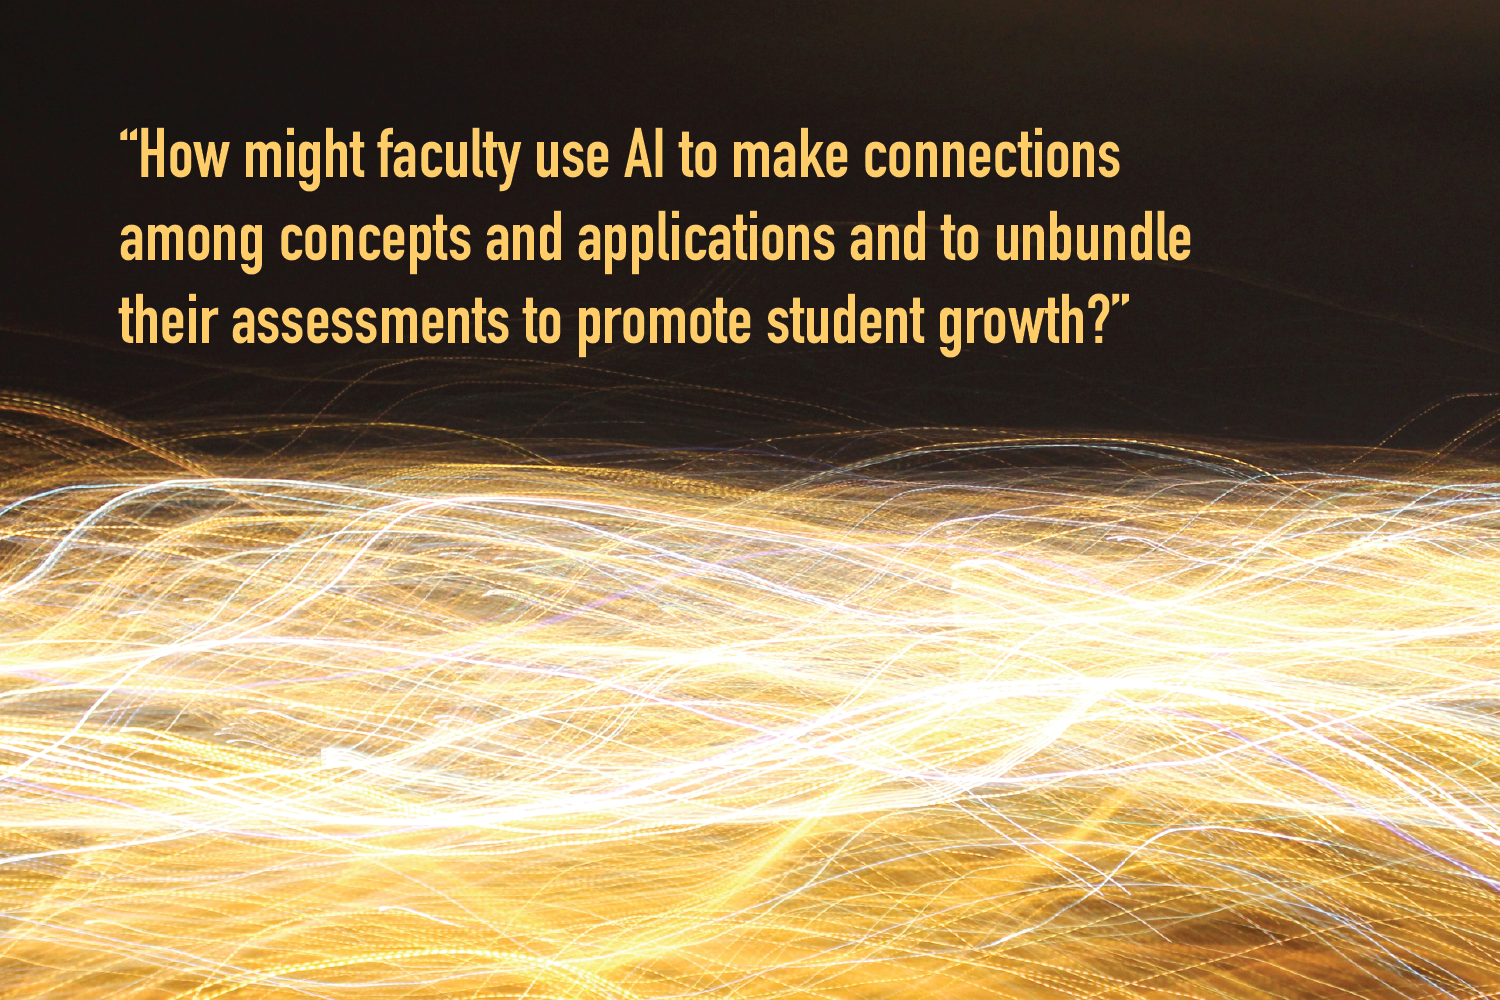 A time-lapse photo shows thousands of wavy lines of yellow and white light on a black background. Text overlay reads “How might faculty use AI to make connections among concepts and applications and to unbundle their assessments to promote student growth?”